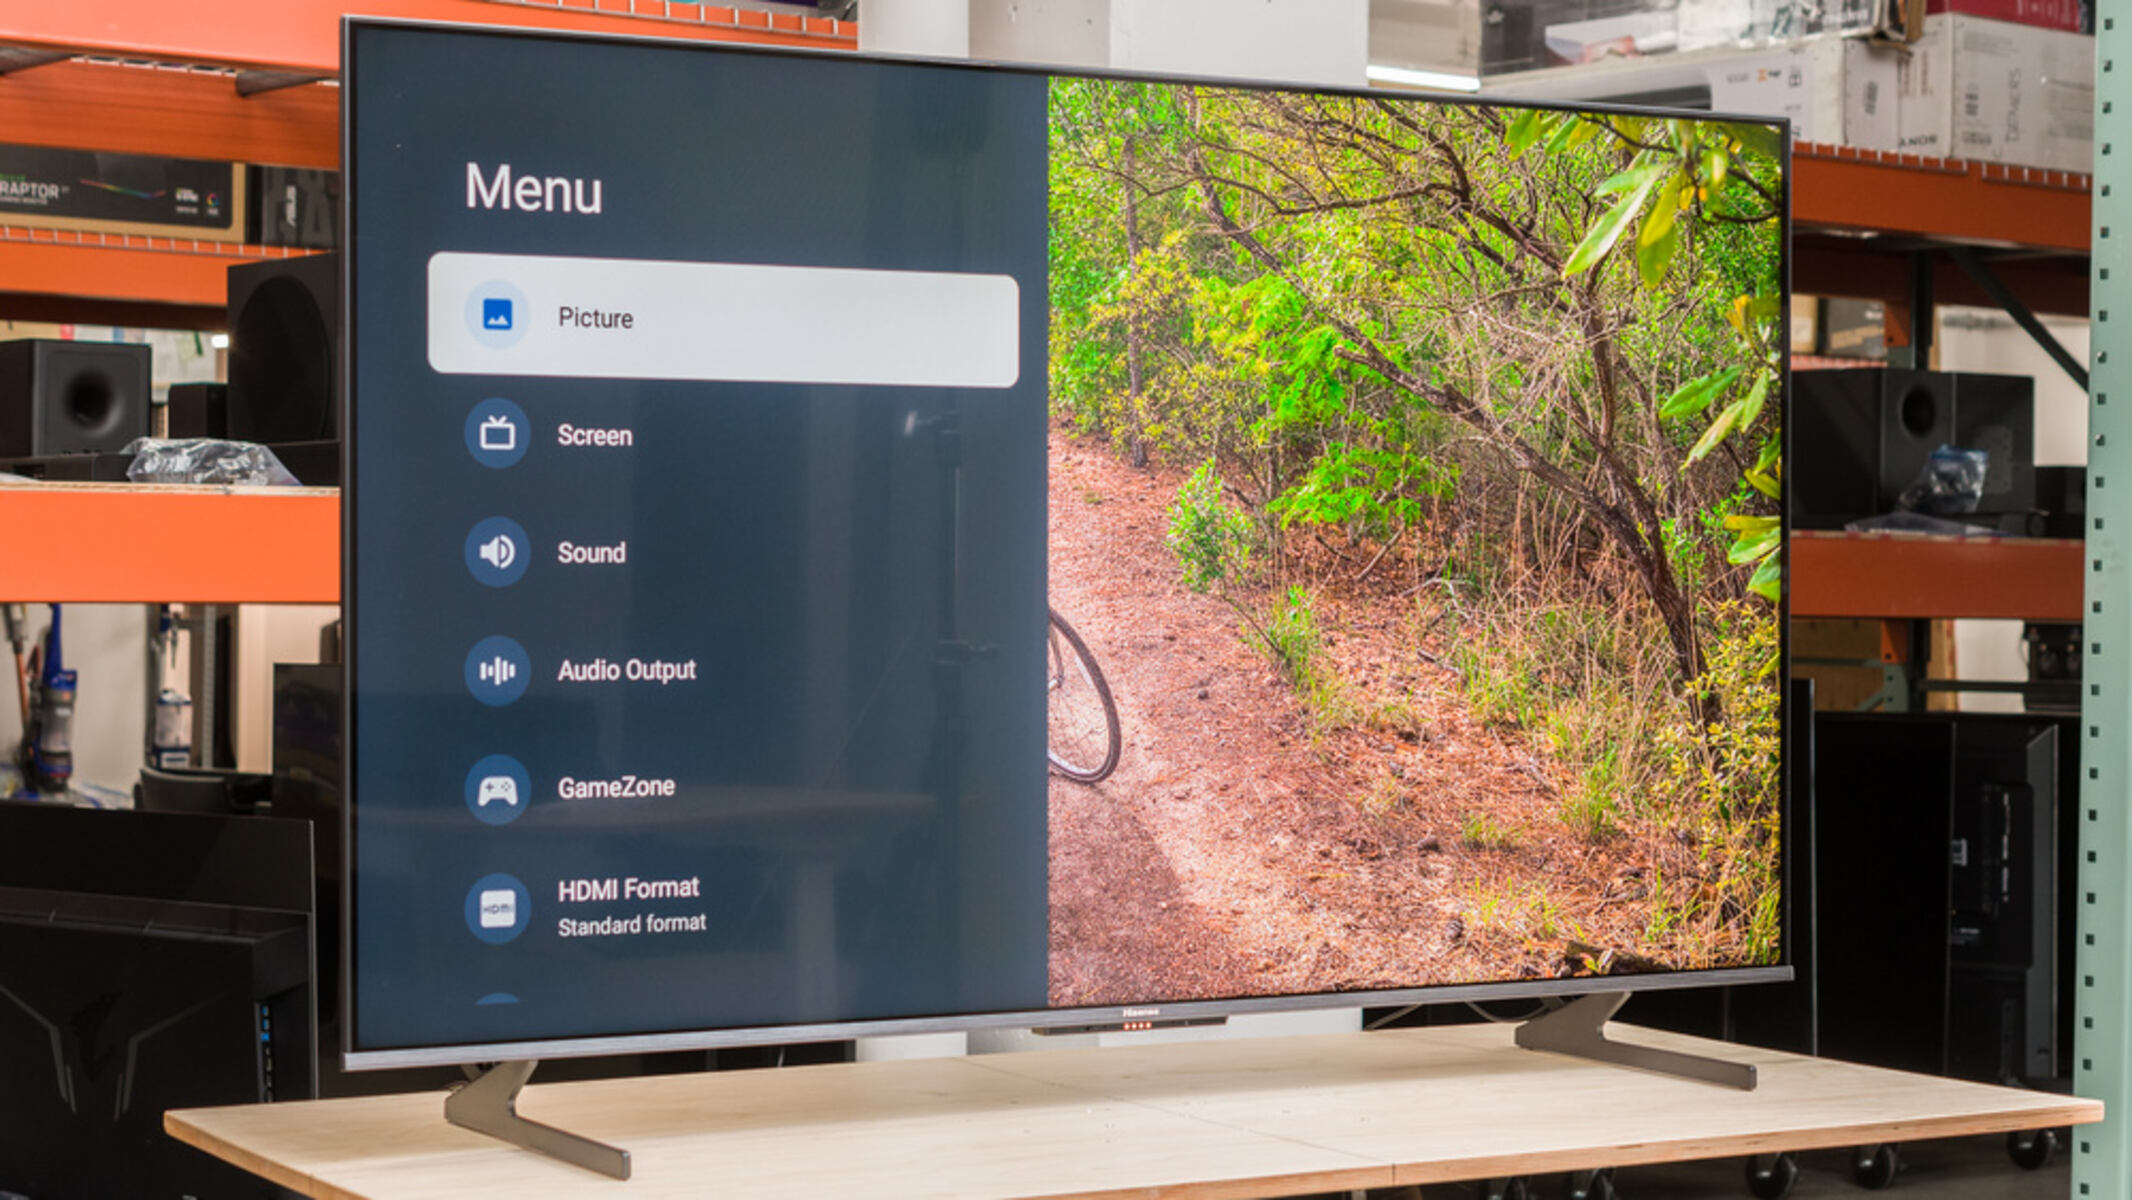 how-to-change-hdmi-on-hisense-tv-without-remote